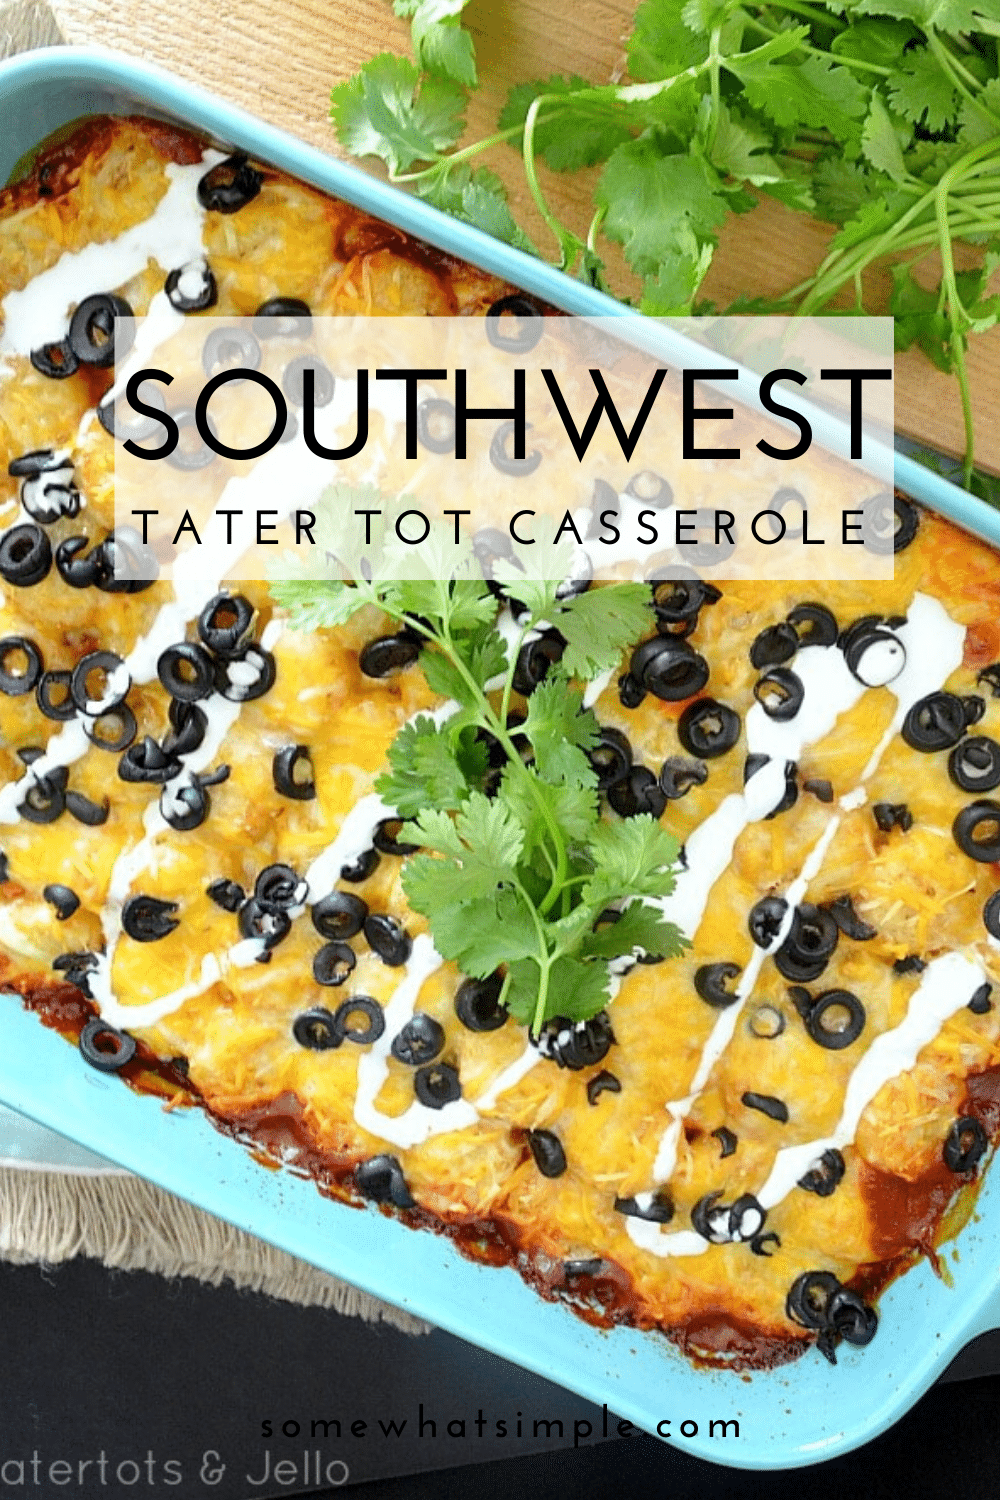 Southwest tater tot casserole is a delicious twist on a classic recipe. Loaded with the Mexican flavors of the Southwest, this casserole is an easy dinner everyone will love. via @somewhatsimple